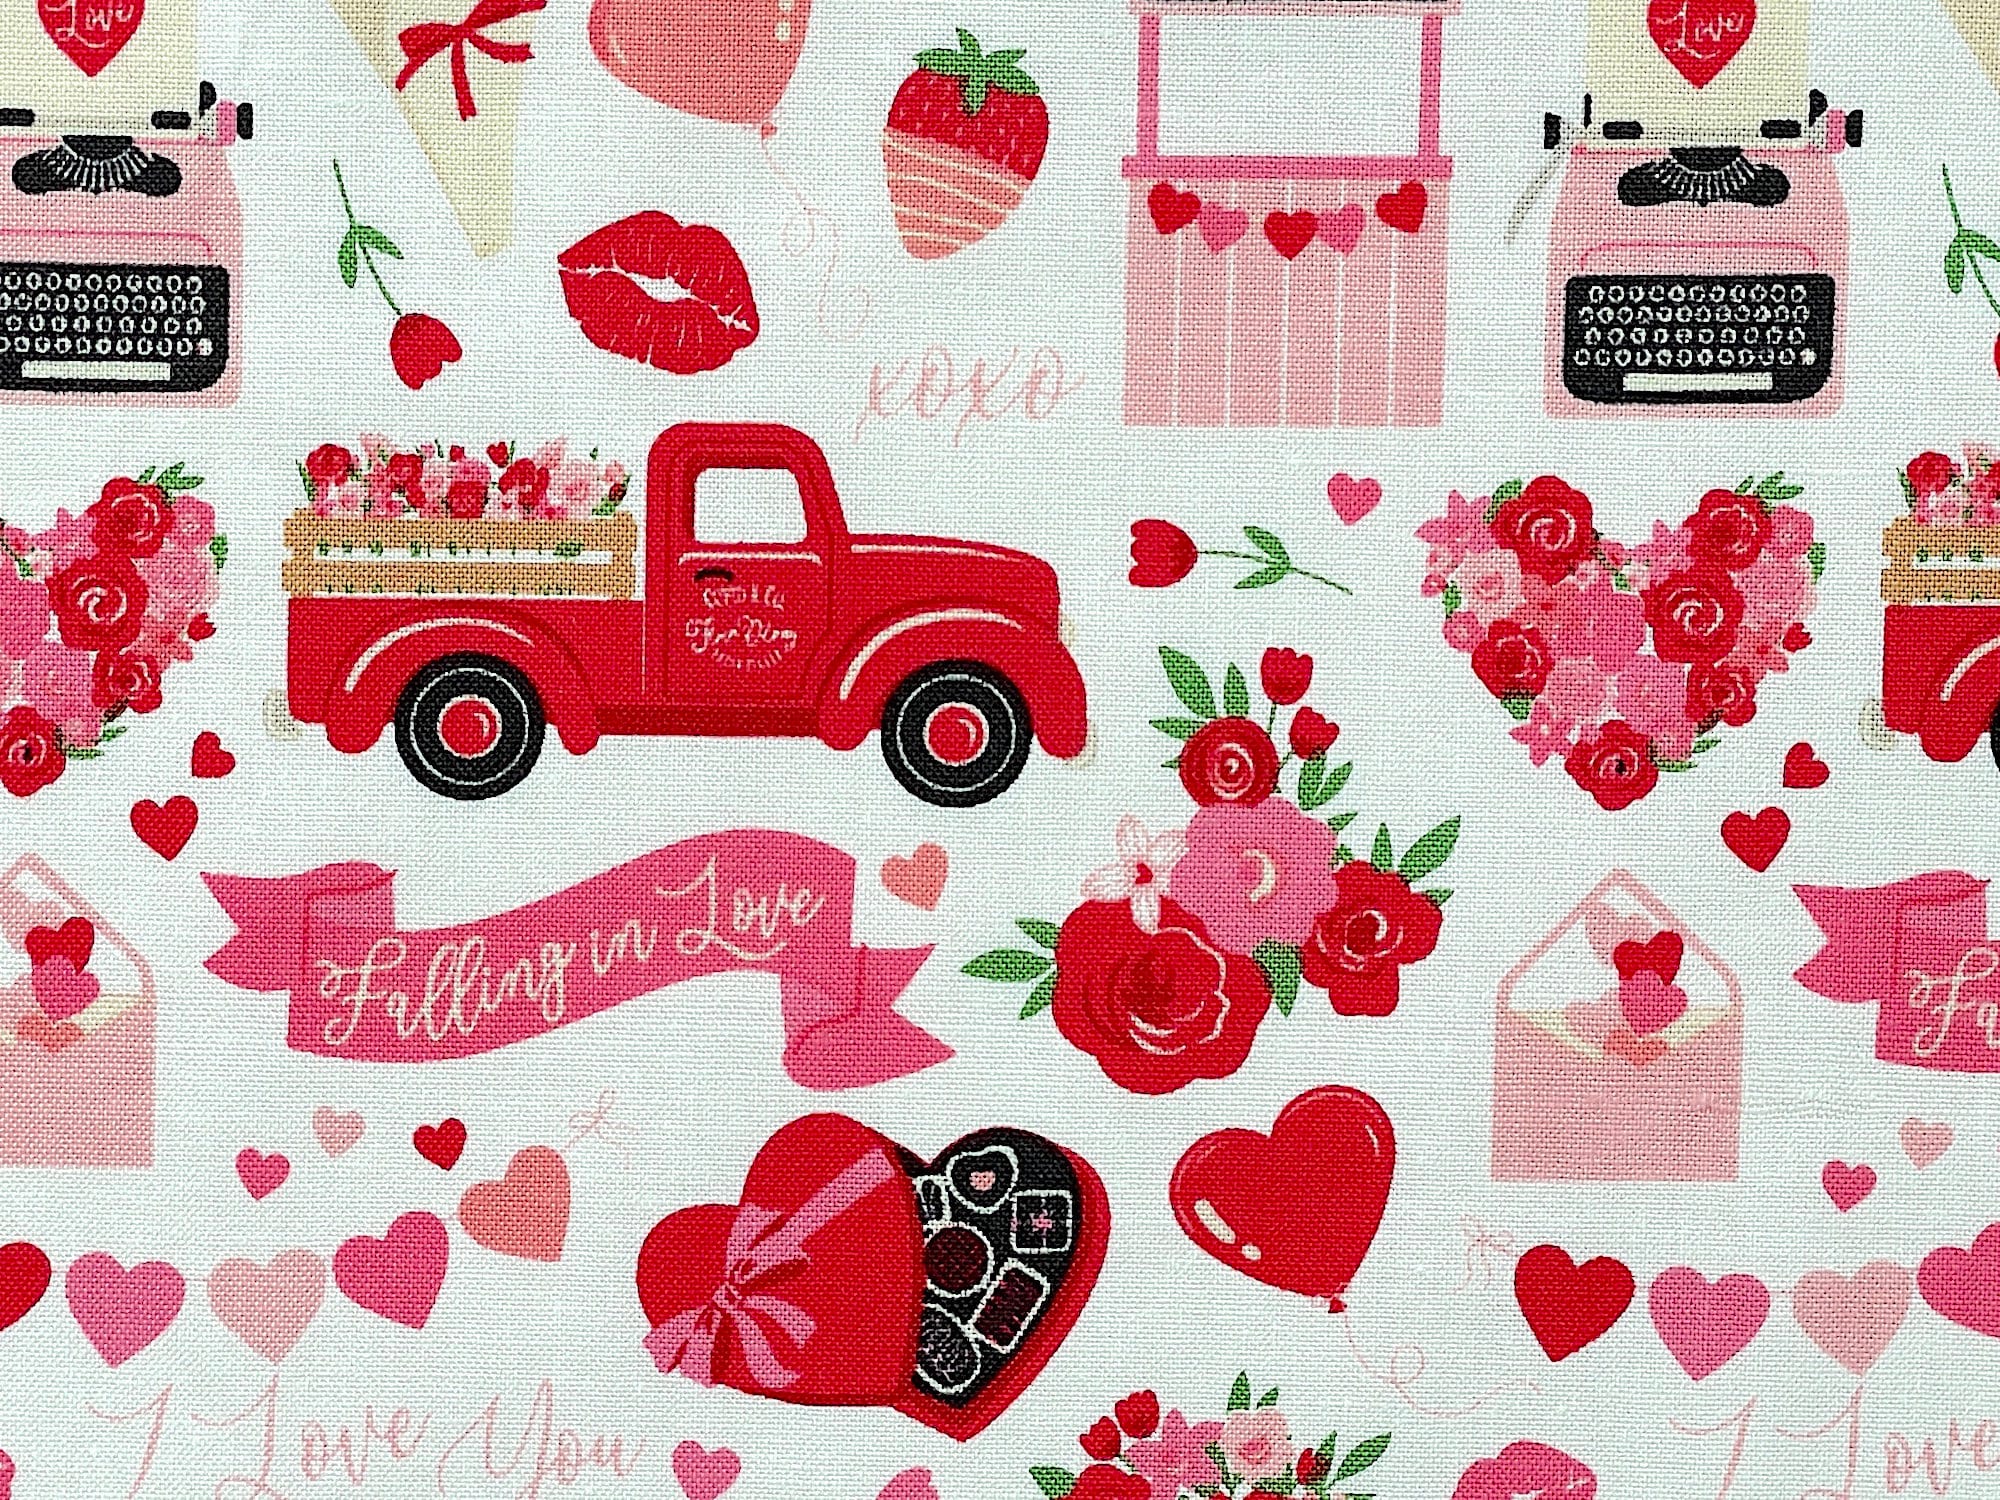 Close up of hearts, flowers, red truck, candy, lips and more.